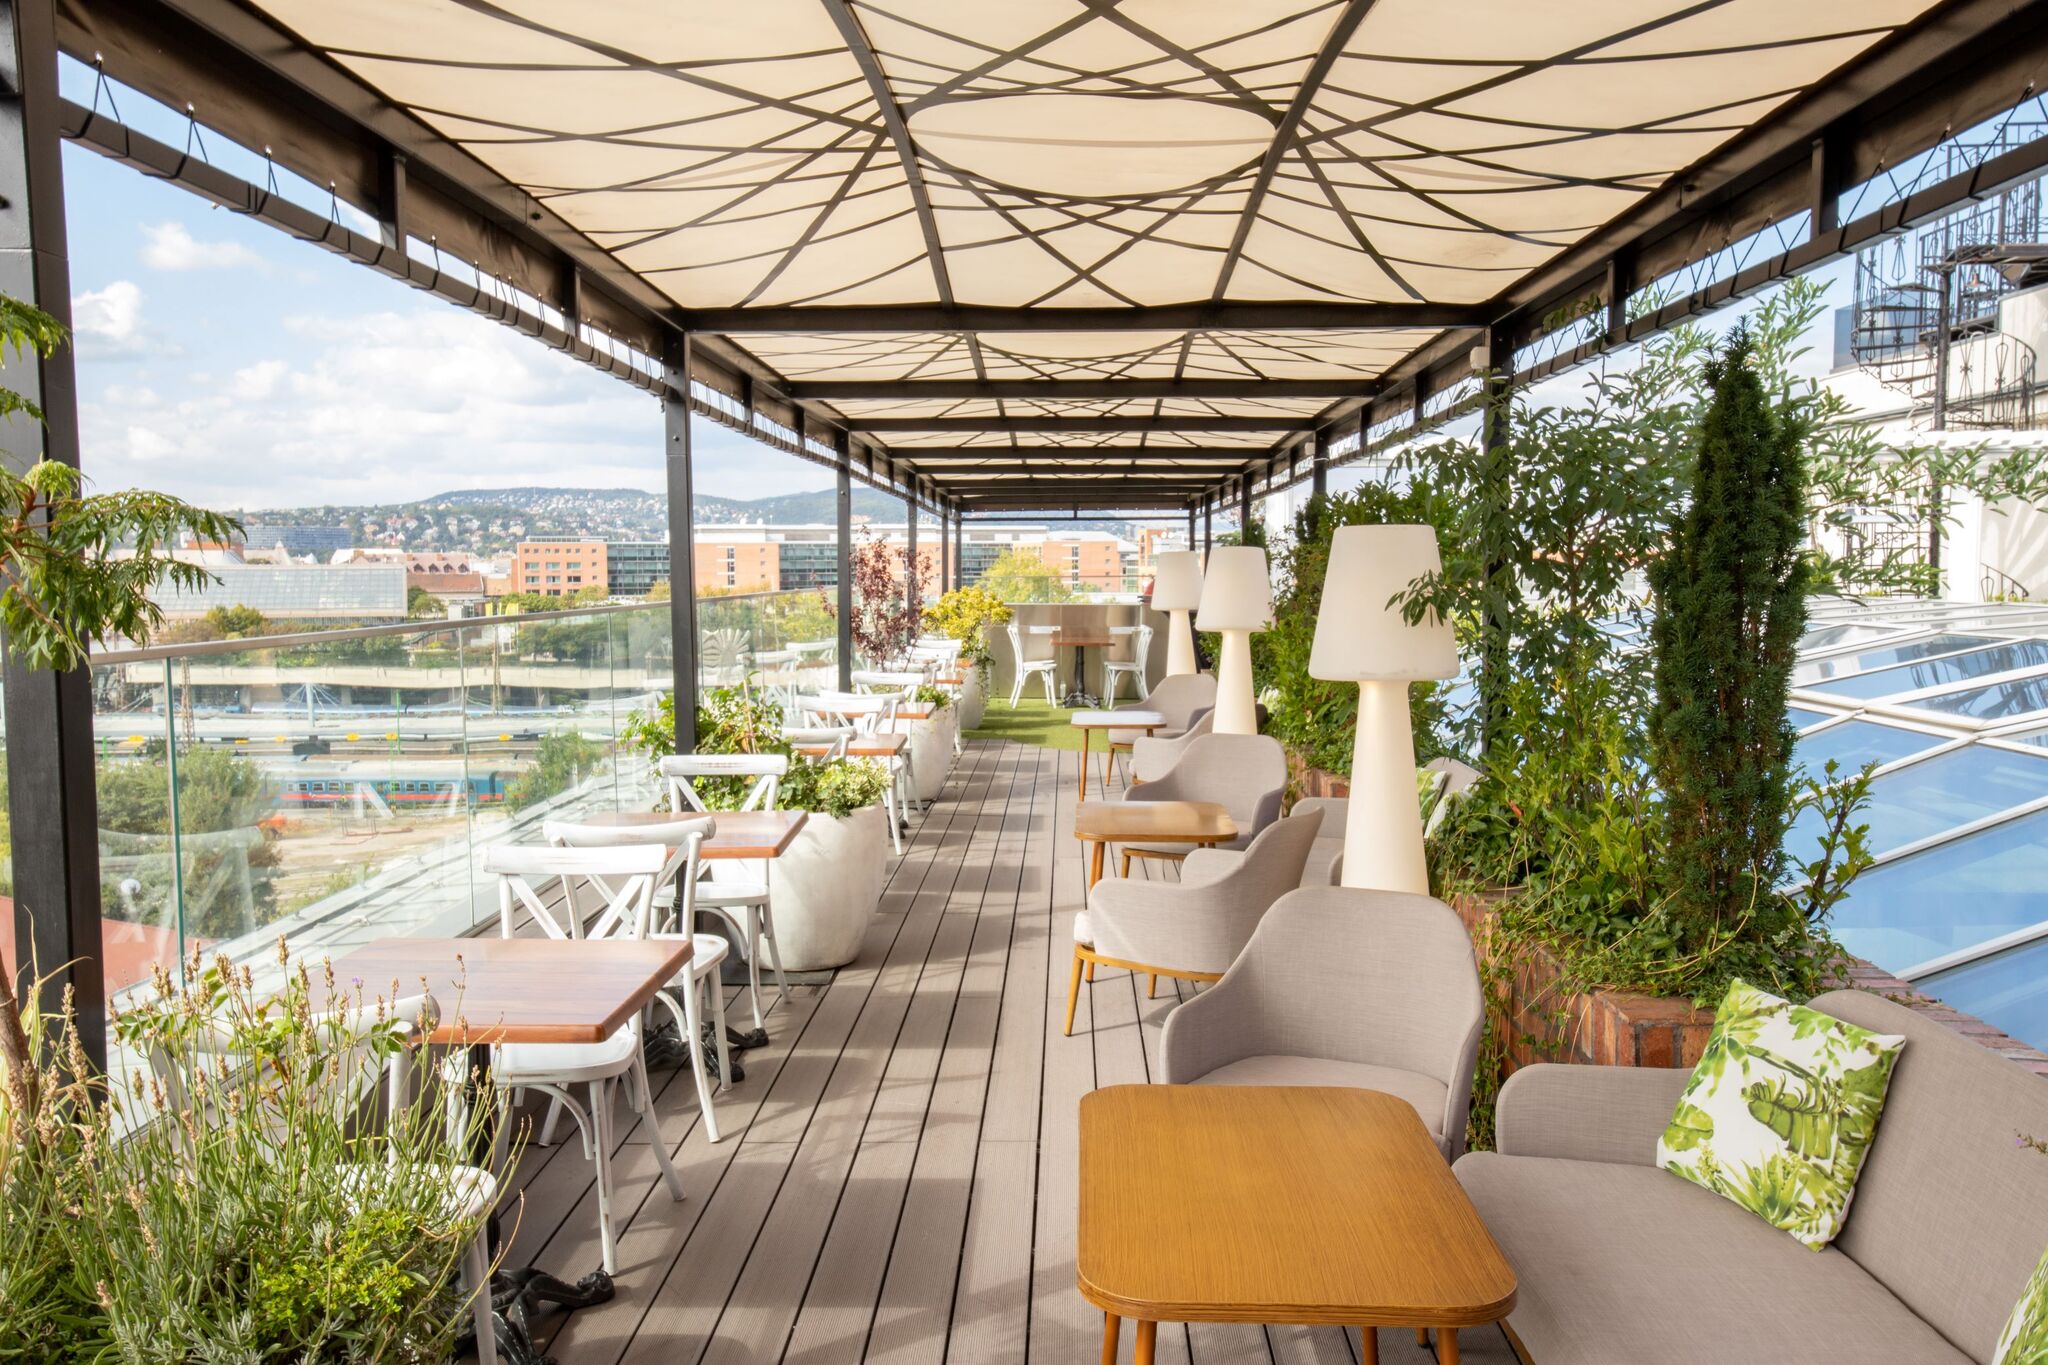 The Sky Garden Rooftop Terrace awaits guests with special cocktails and snacks from late spring to early fall